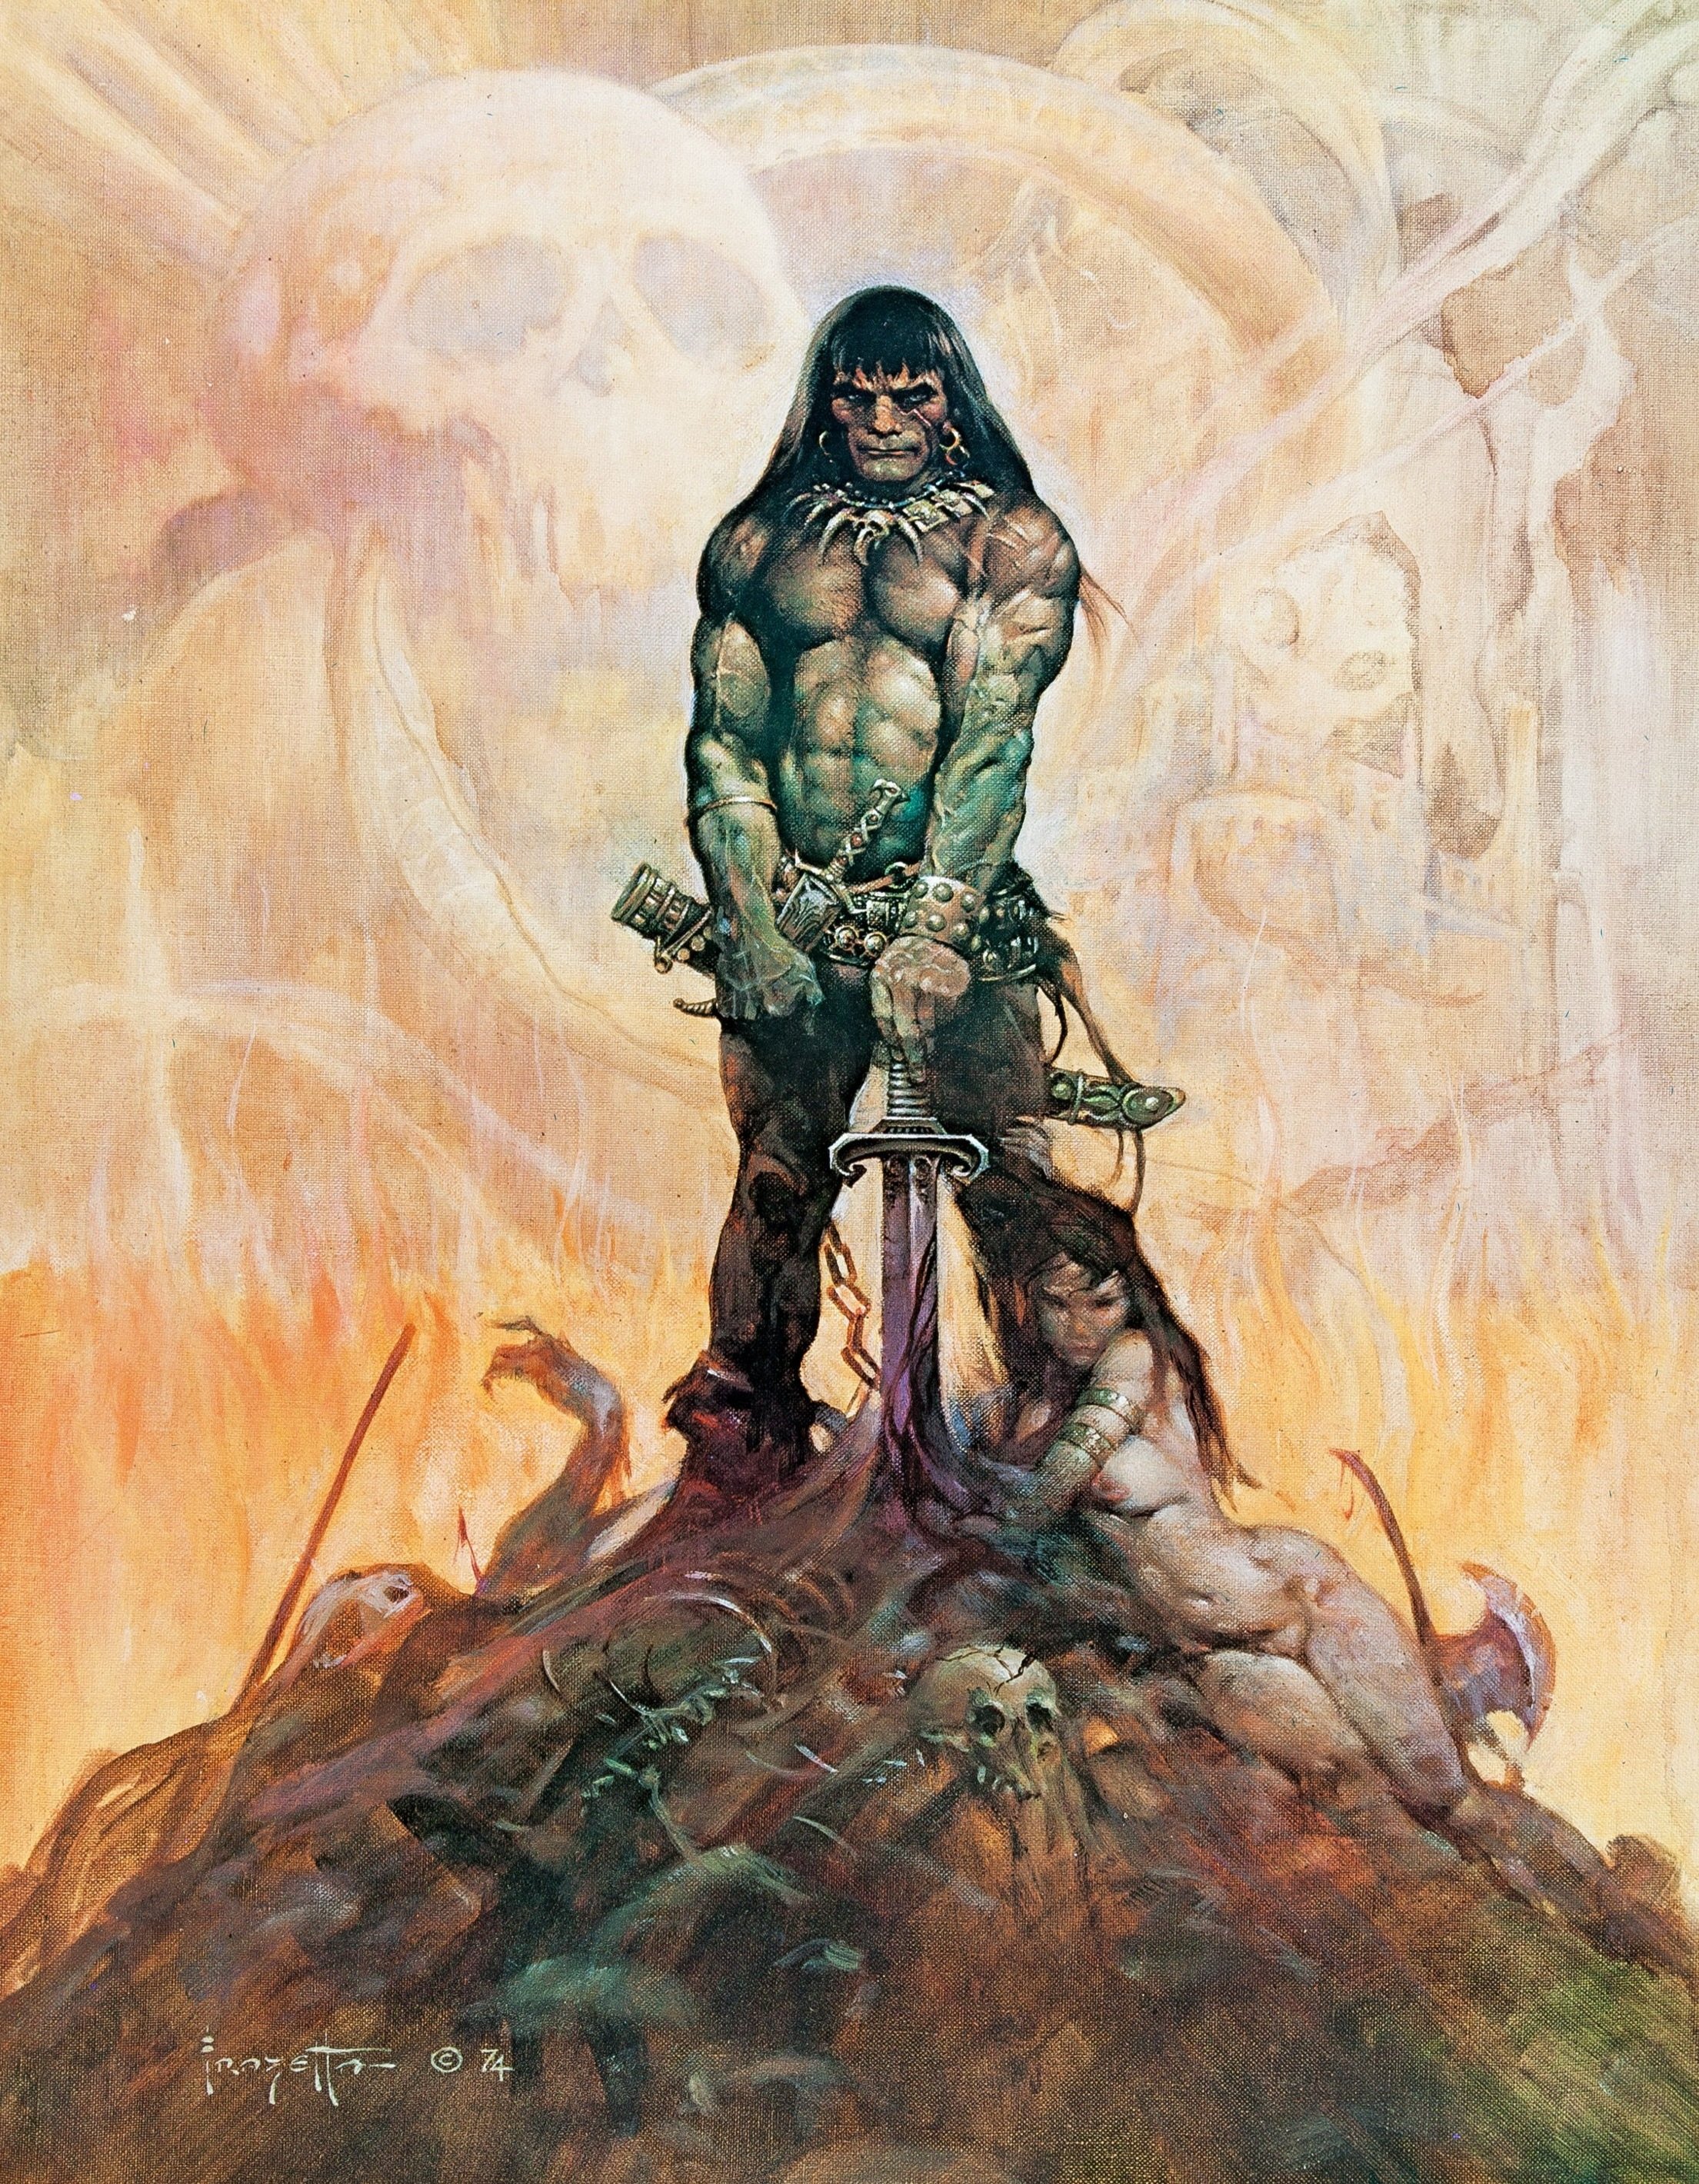 Blogging Conan: Rogues in the House